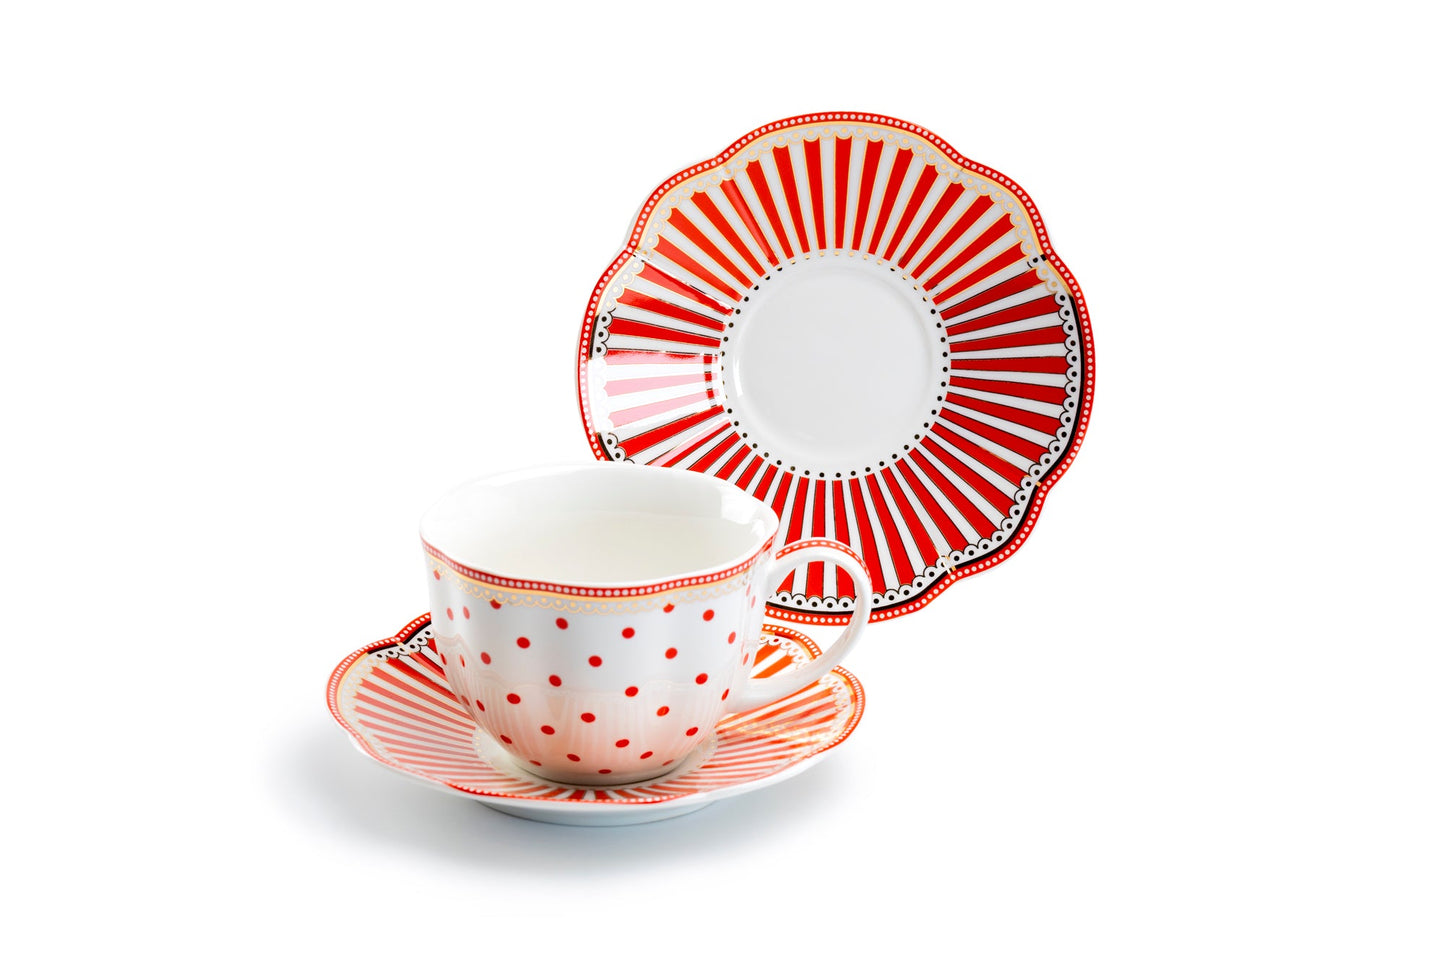 Red Josephine Stripes and Dots Fine Porcelain Cup and Saucer Sets